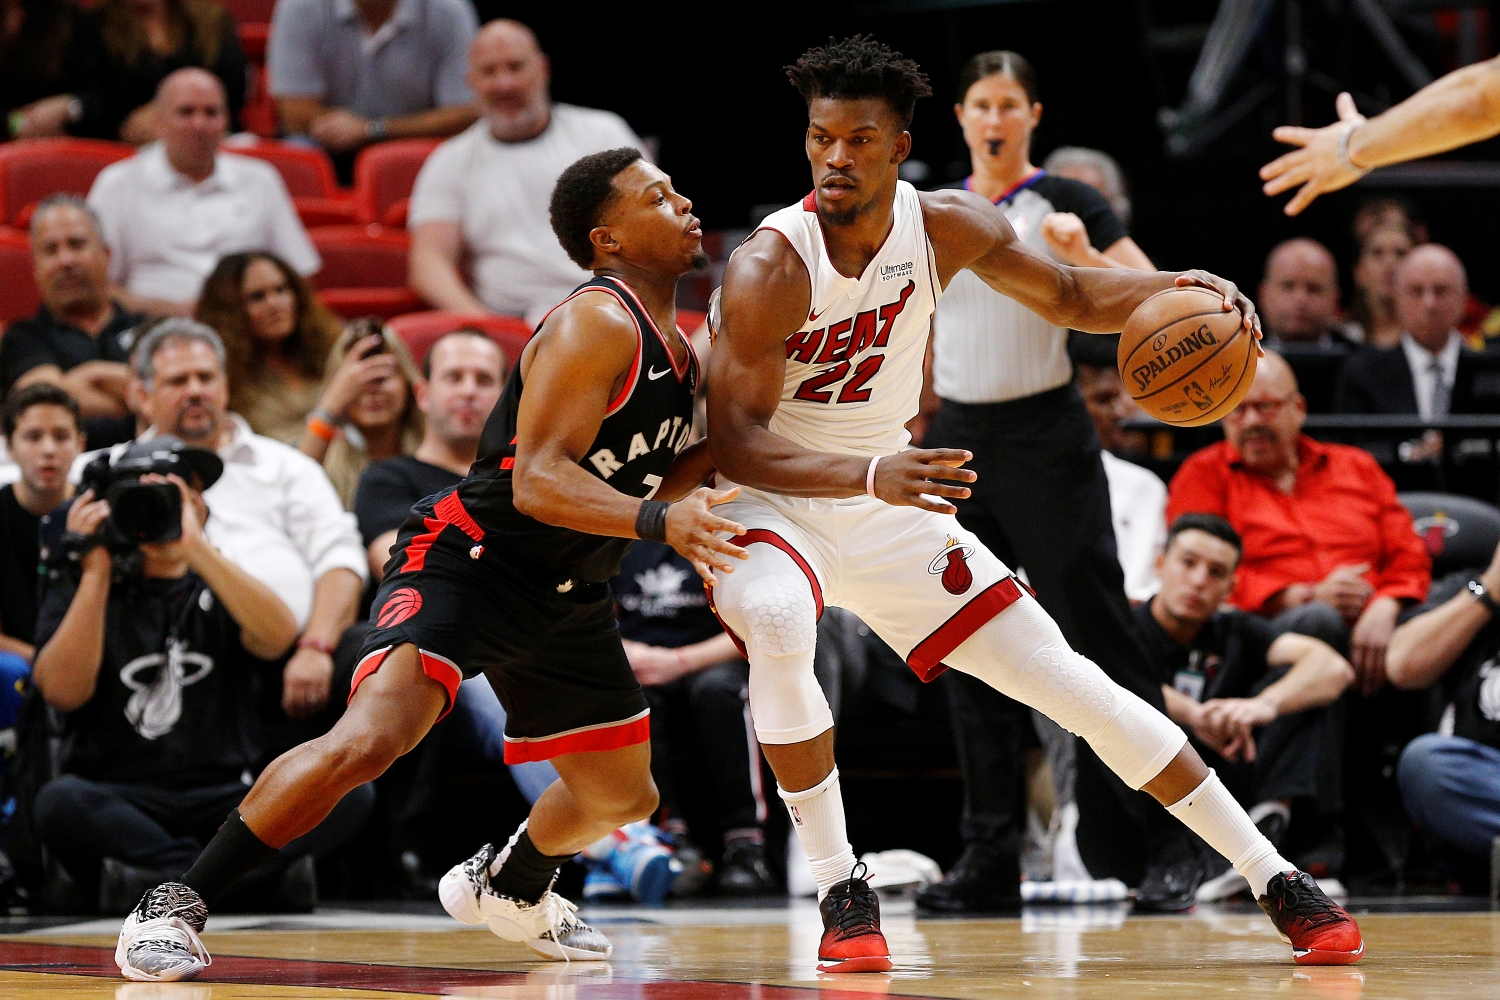 Jimmy Butler posts up against Kyle Lowry in a game between the Miami Heat and the Toronto Raptors on Jan. 2, 2020.